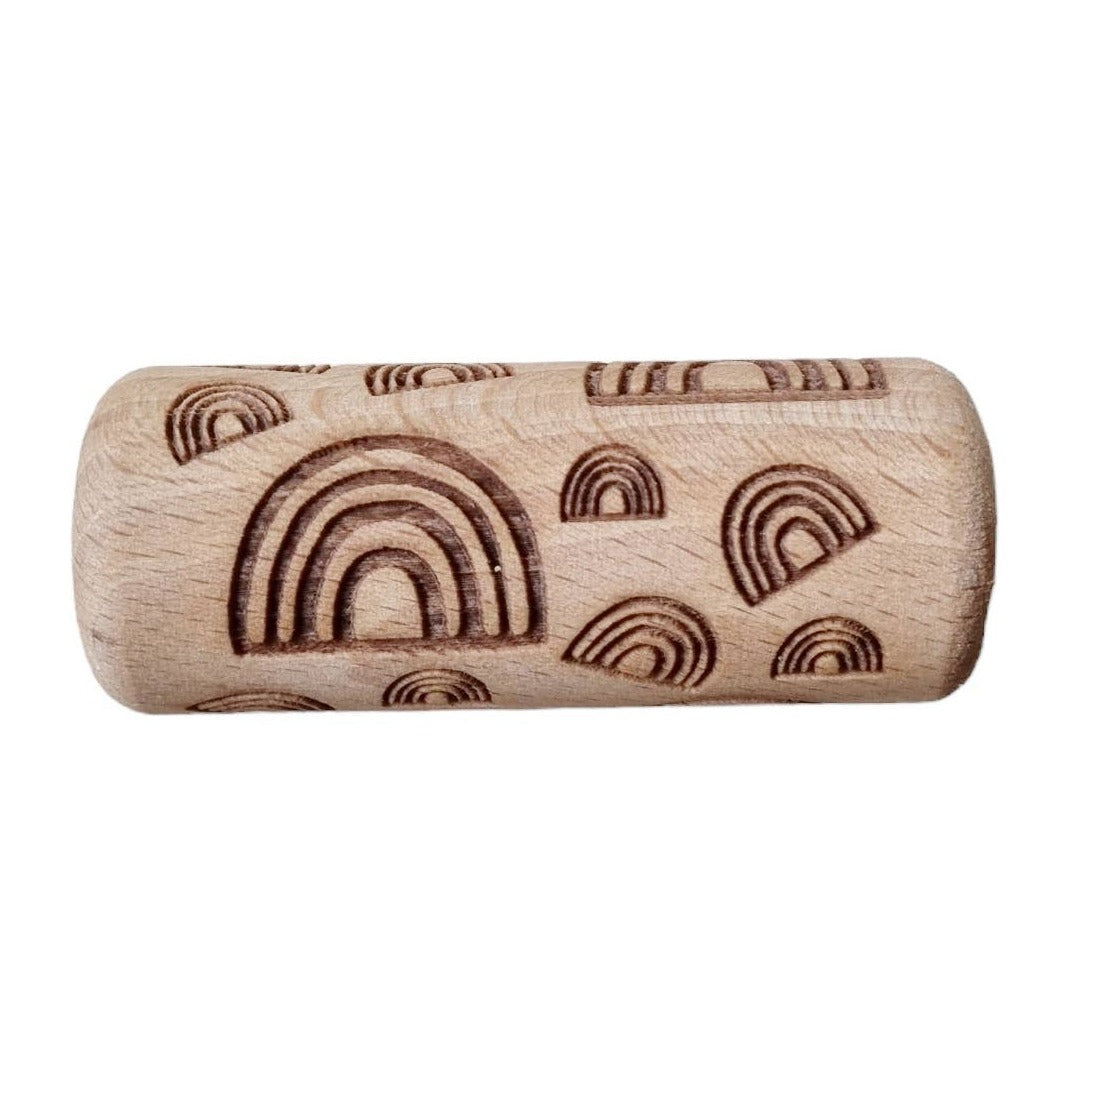 Rainbow Wooden Roller, Introducing our wooden clay roller, perfect for creating unique patterns and textures in your clay creations! With its fun and playful design featuring raised relief patterns, you can easily roll out rainbows, waves, and other fun designs in your clay. Made from high-quality wood, this roller is durable and built to last through many creative projects. Perfect for open-ended play, sensory play, and more, it's a versatile tool that your children are sure to love. And for added fun, pai